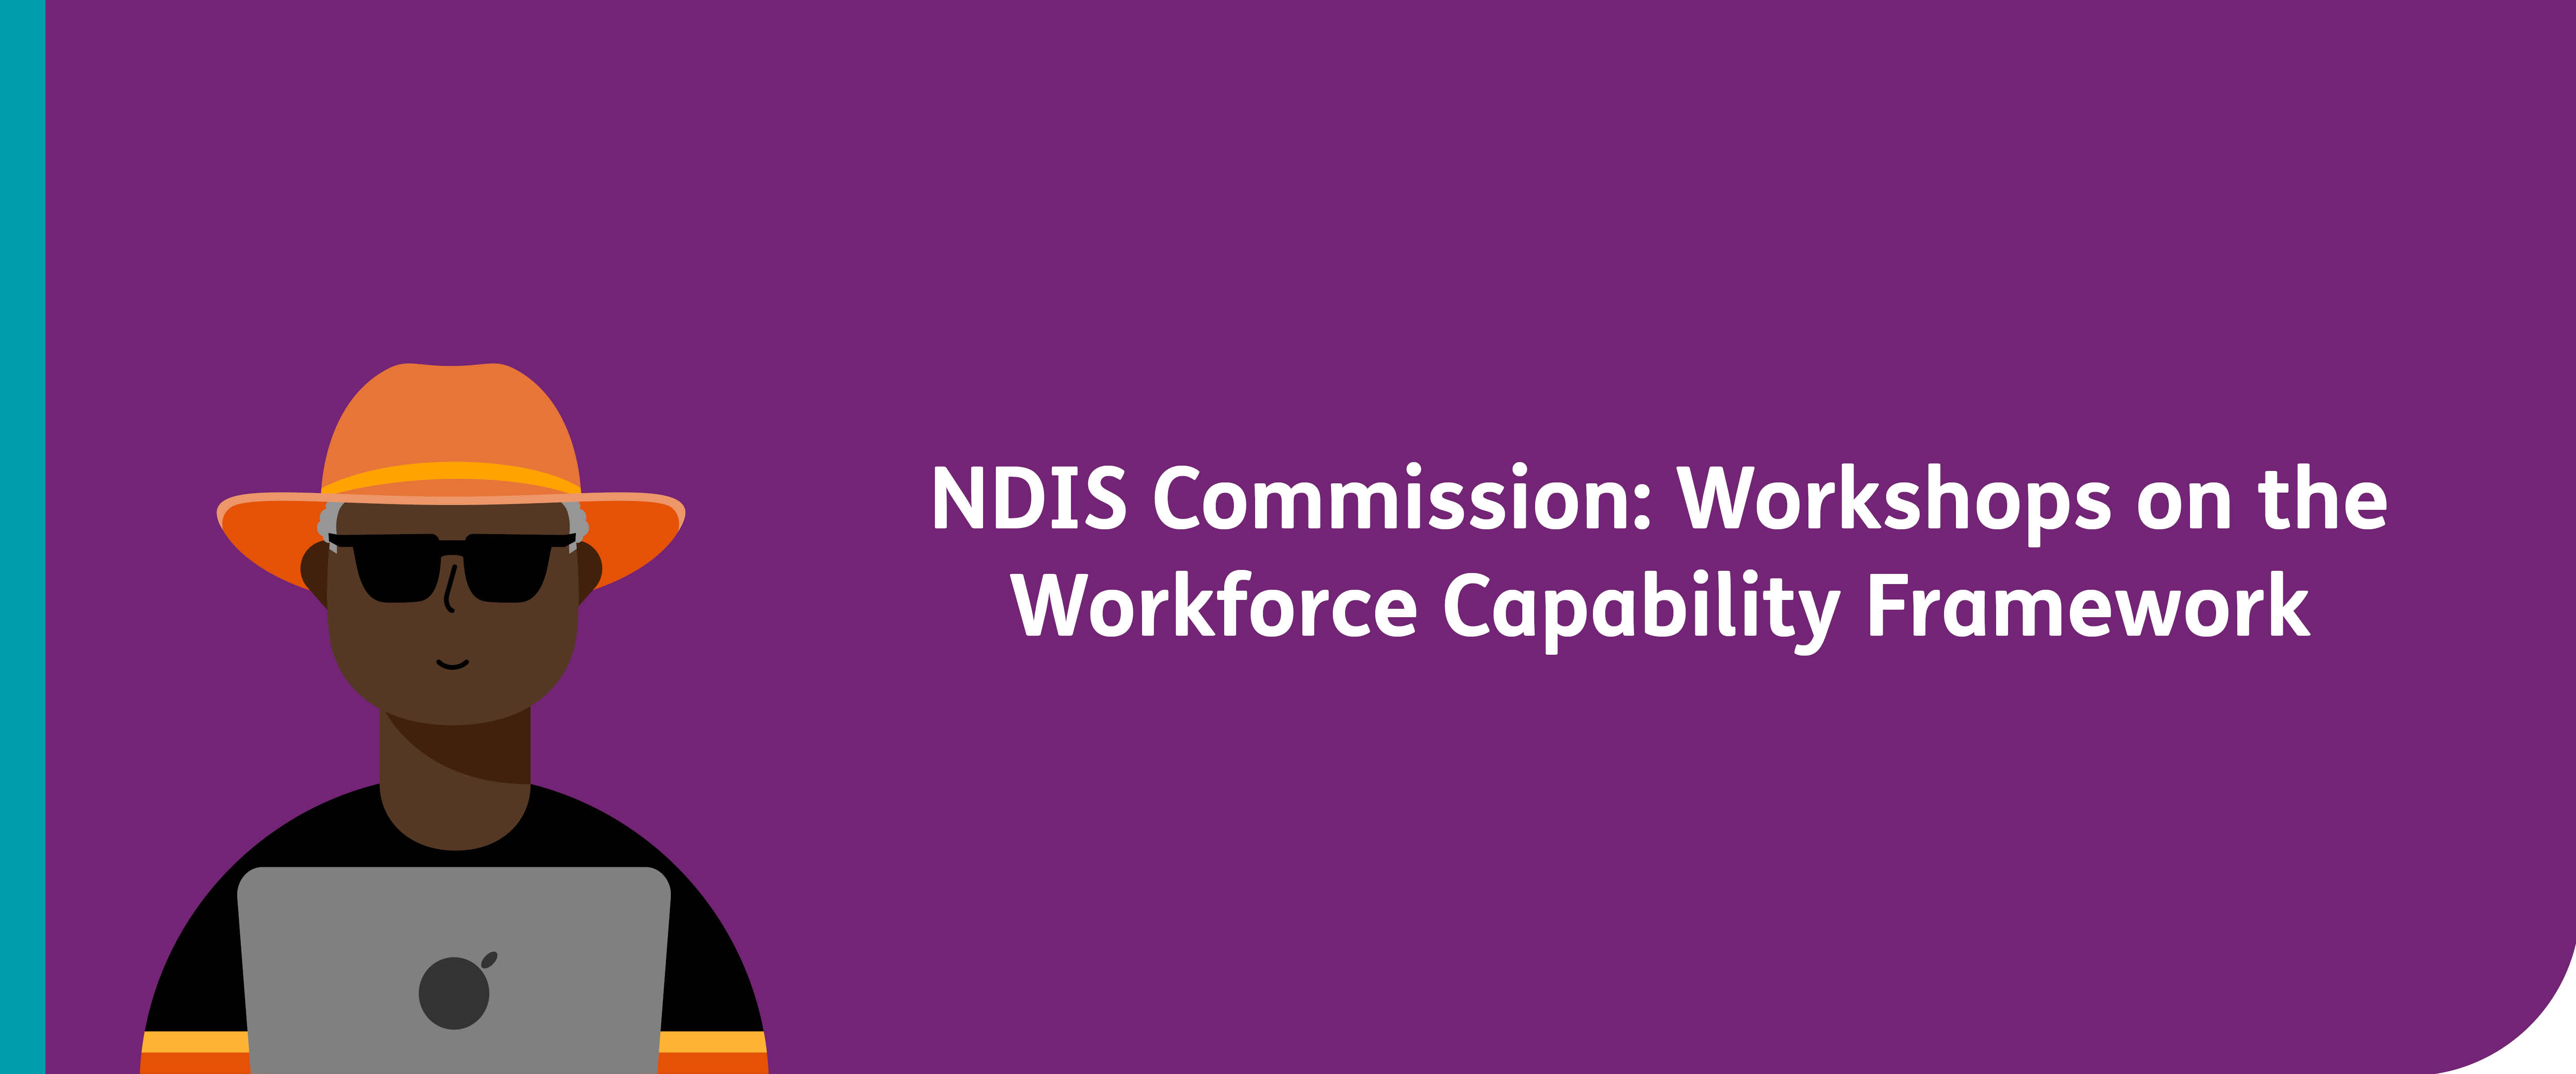 NDIS Commission: Workshops on the Workforce Capability Framework with a cartoon of a person using a laptop